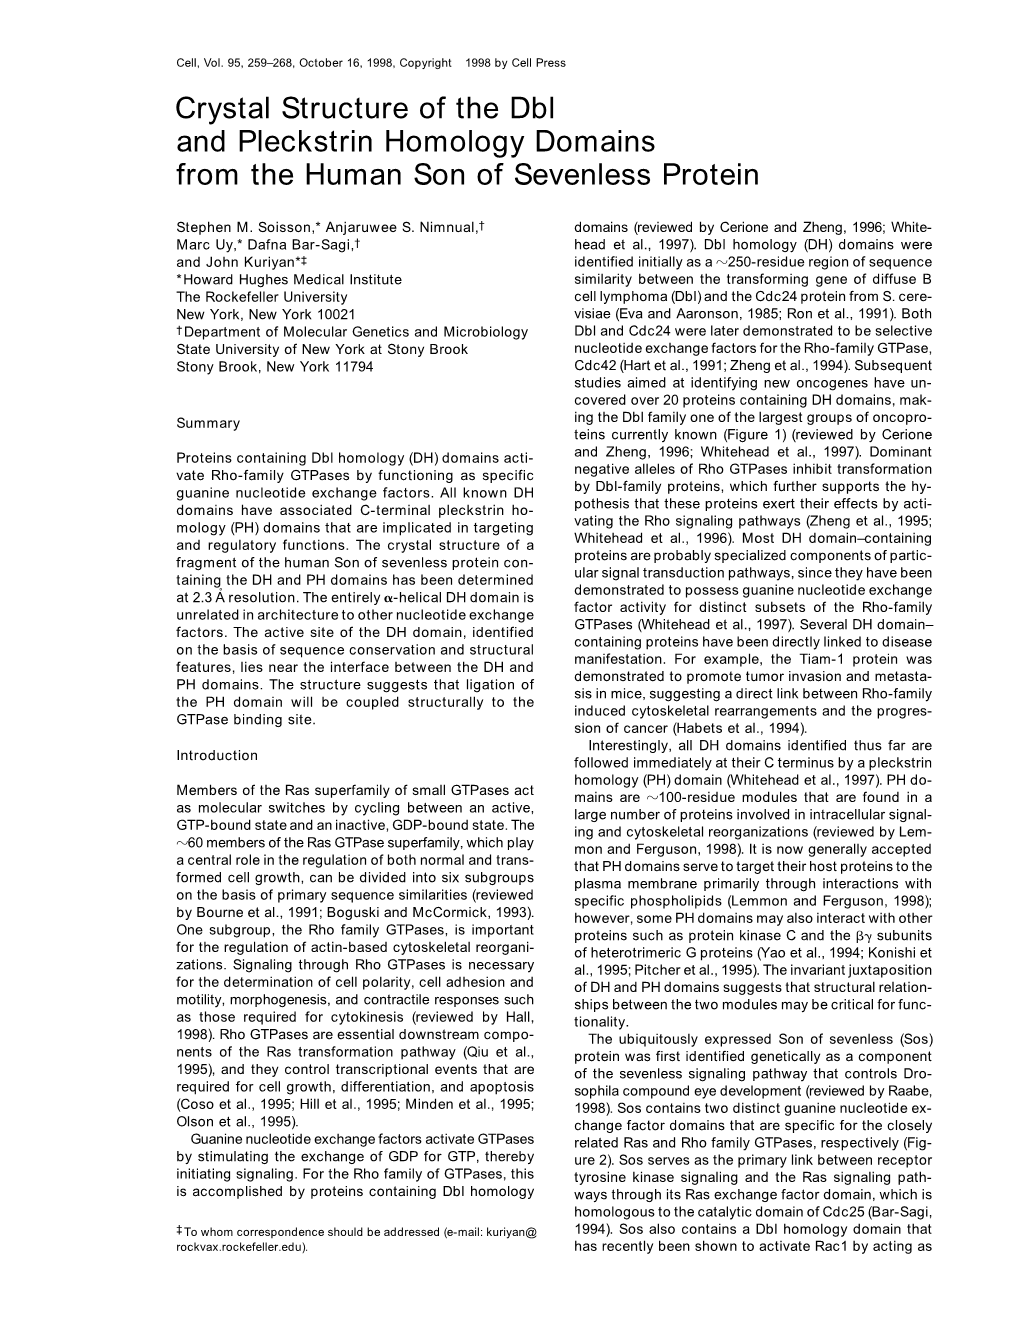 Crystal Structure of the Dbl and Pleckstrin Homology Domains from the Human Son of Sevenless Protein